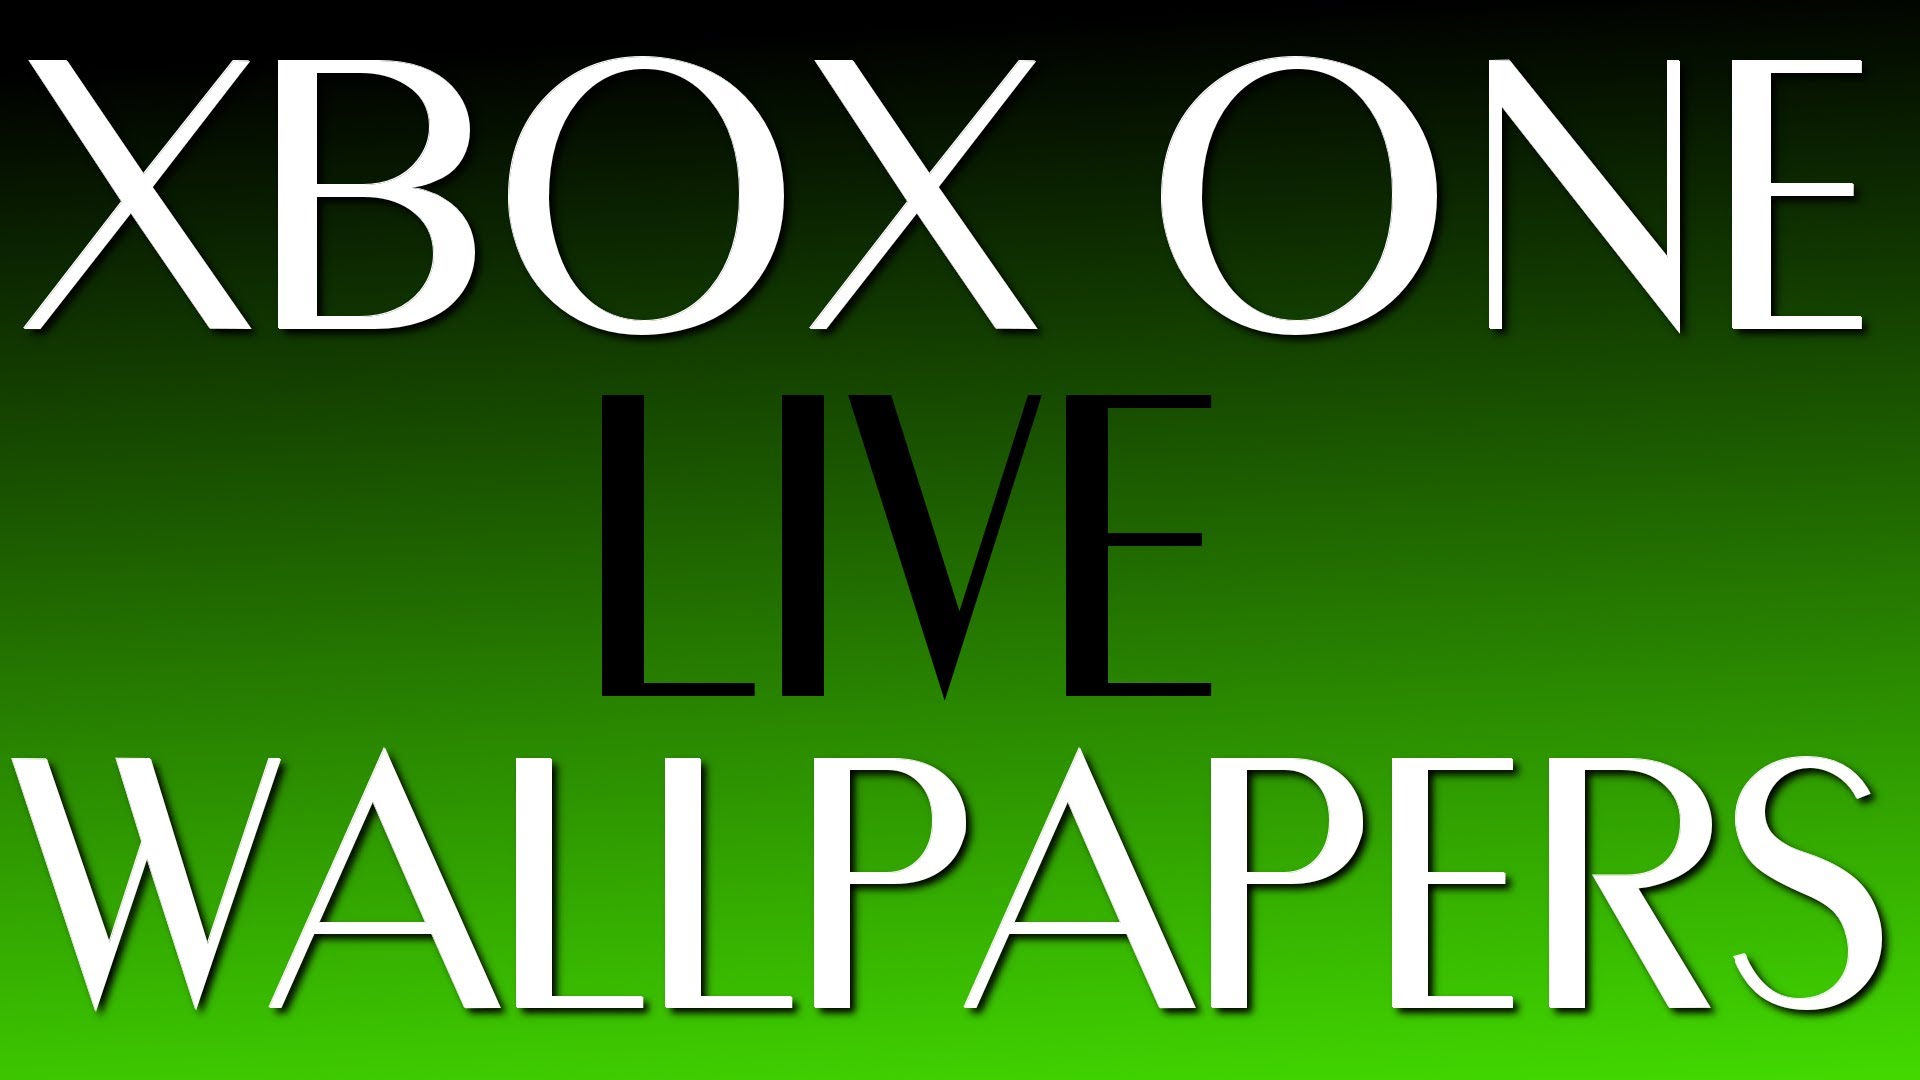 Xbox One Live Wallpapers UI (User Interface) - YouTube